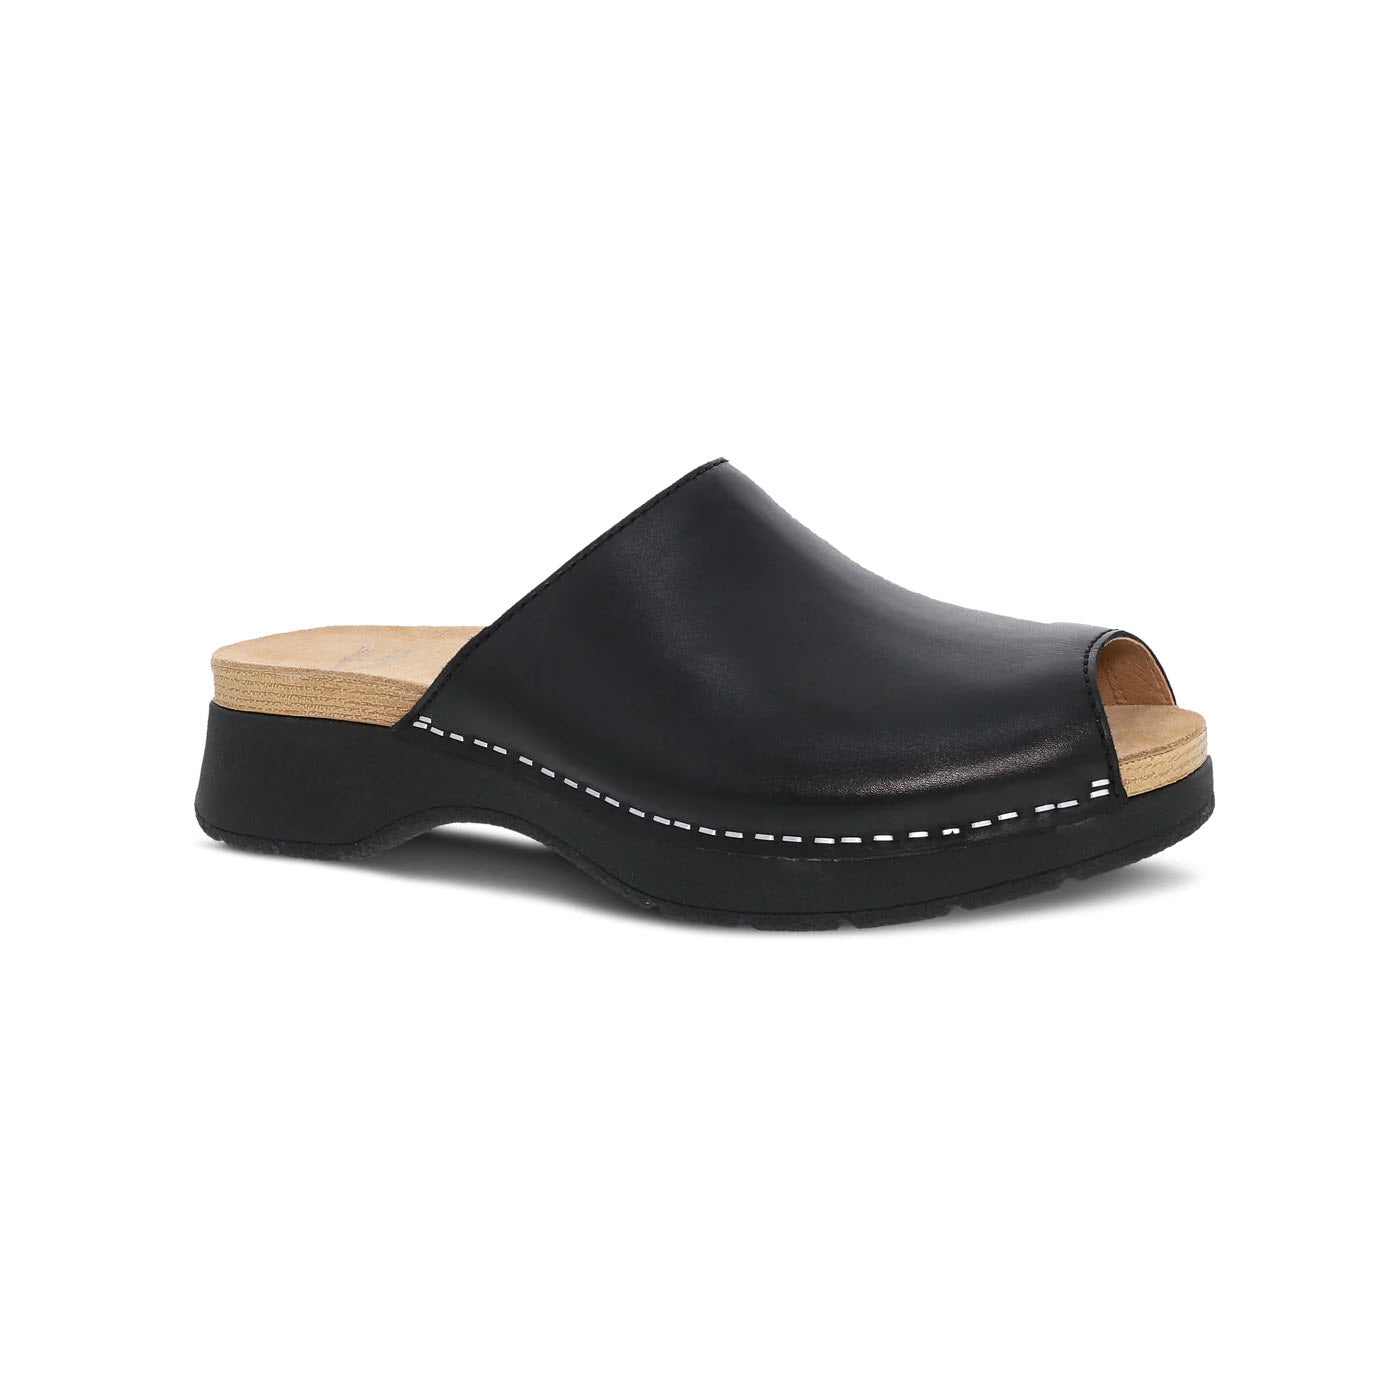 Dansko Ravyn Black clog with a wooden sole and stapled construction, featuring white stitching, shown in a side profile against a white background.